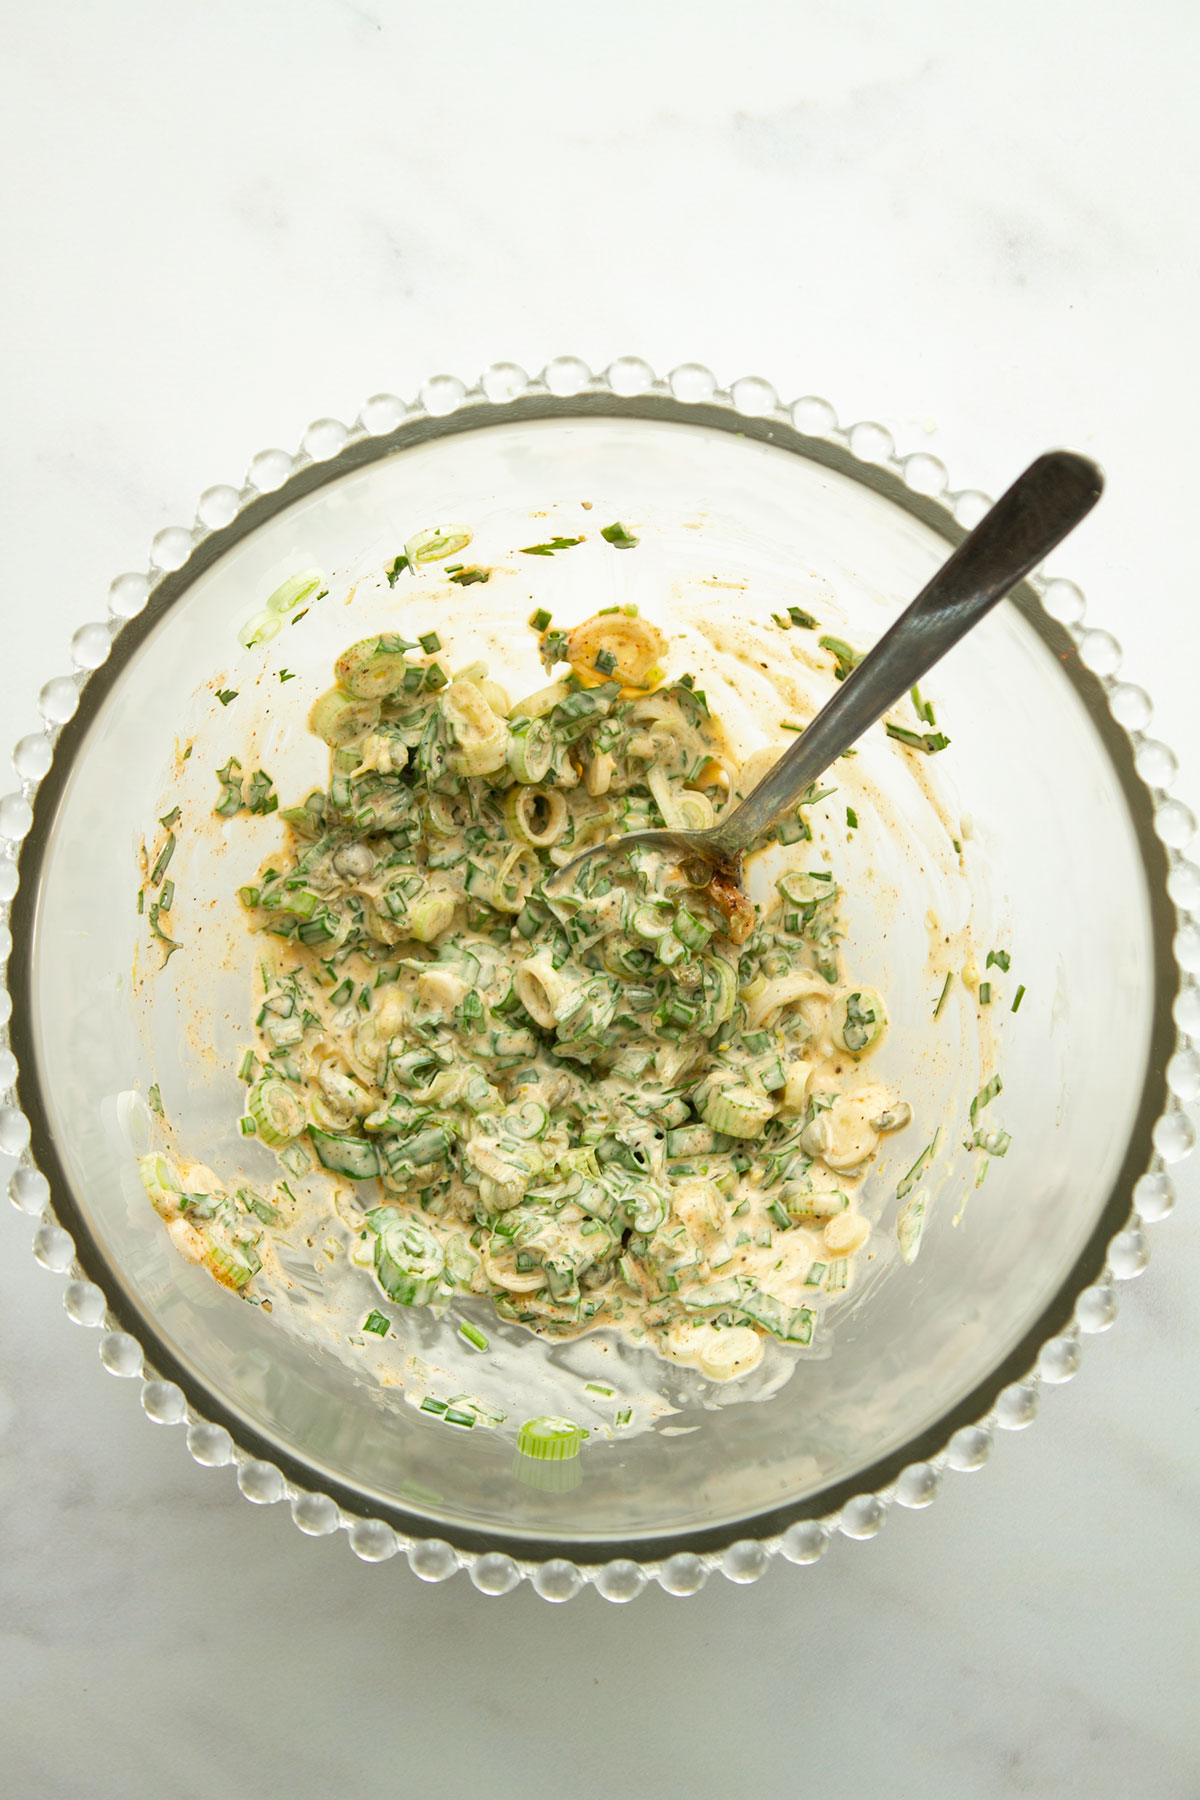 The dressing with scallions capers, parsley, and chives in a glass bowl.